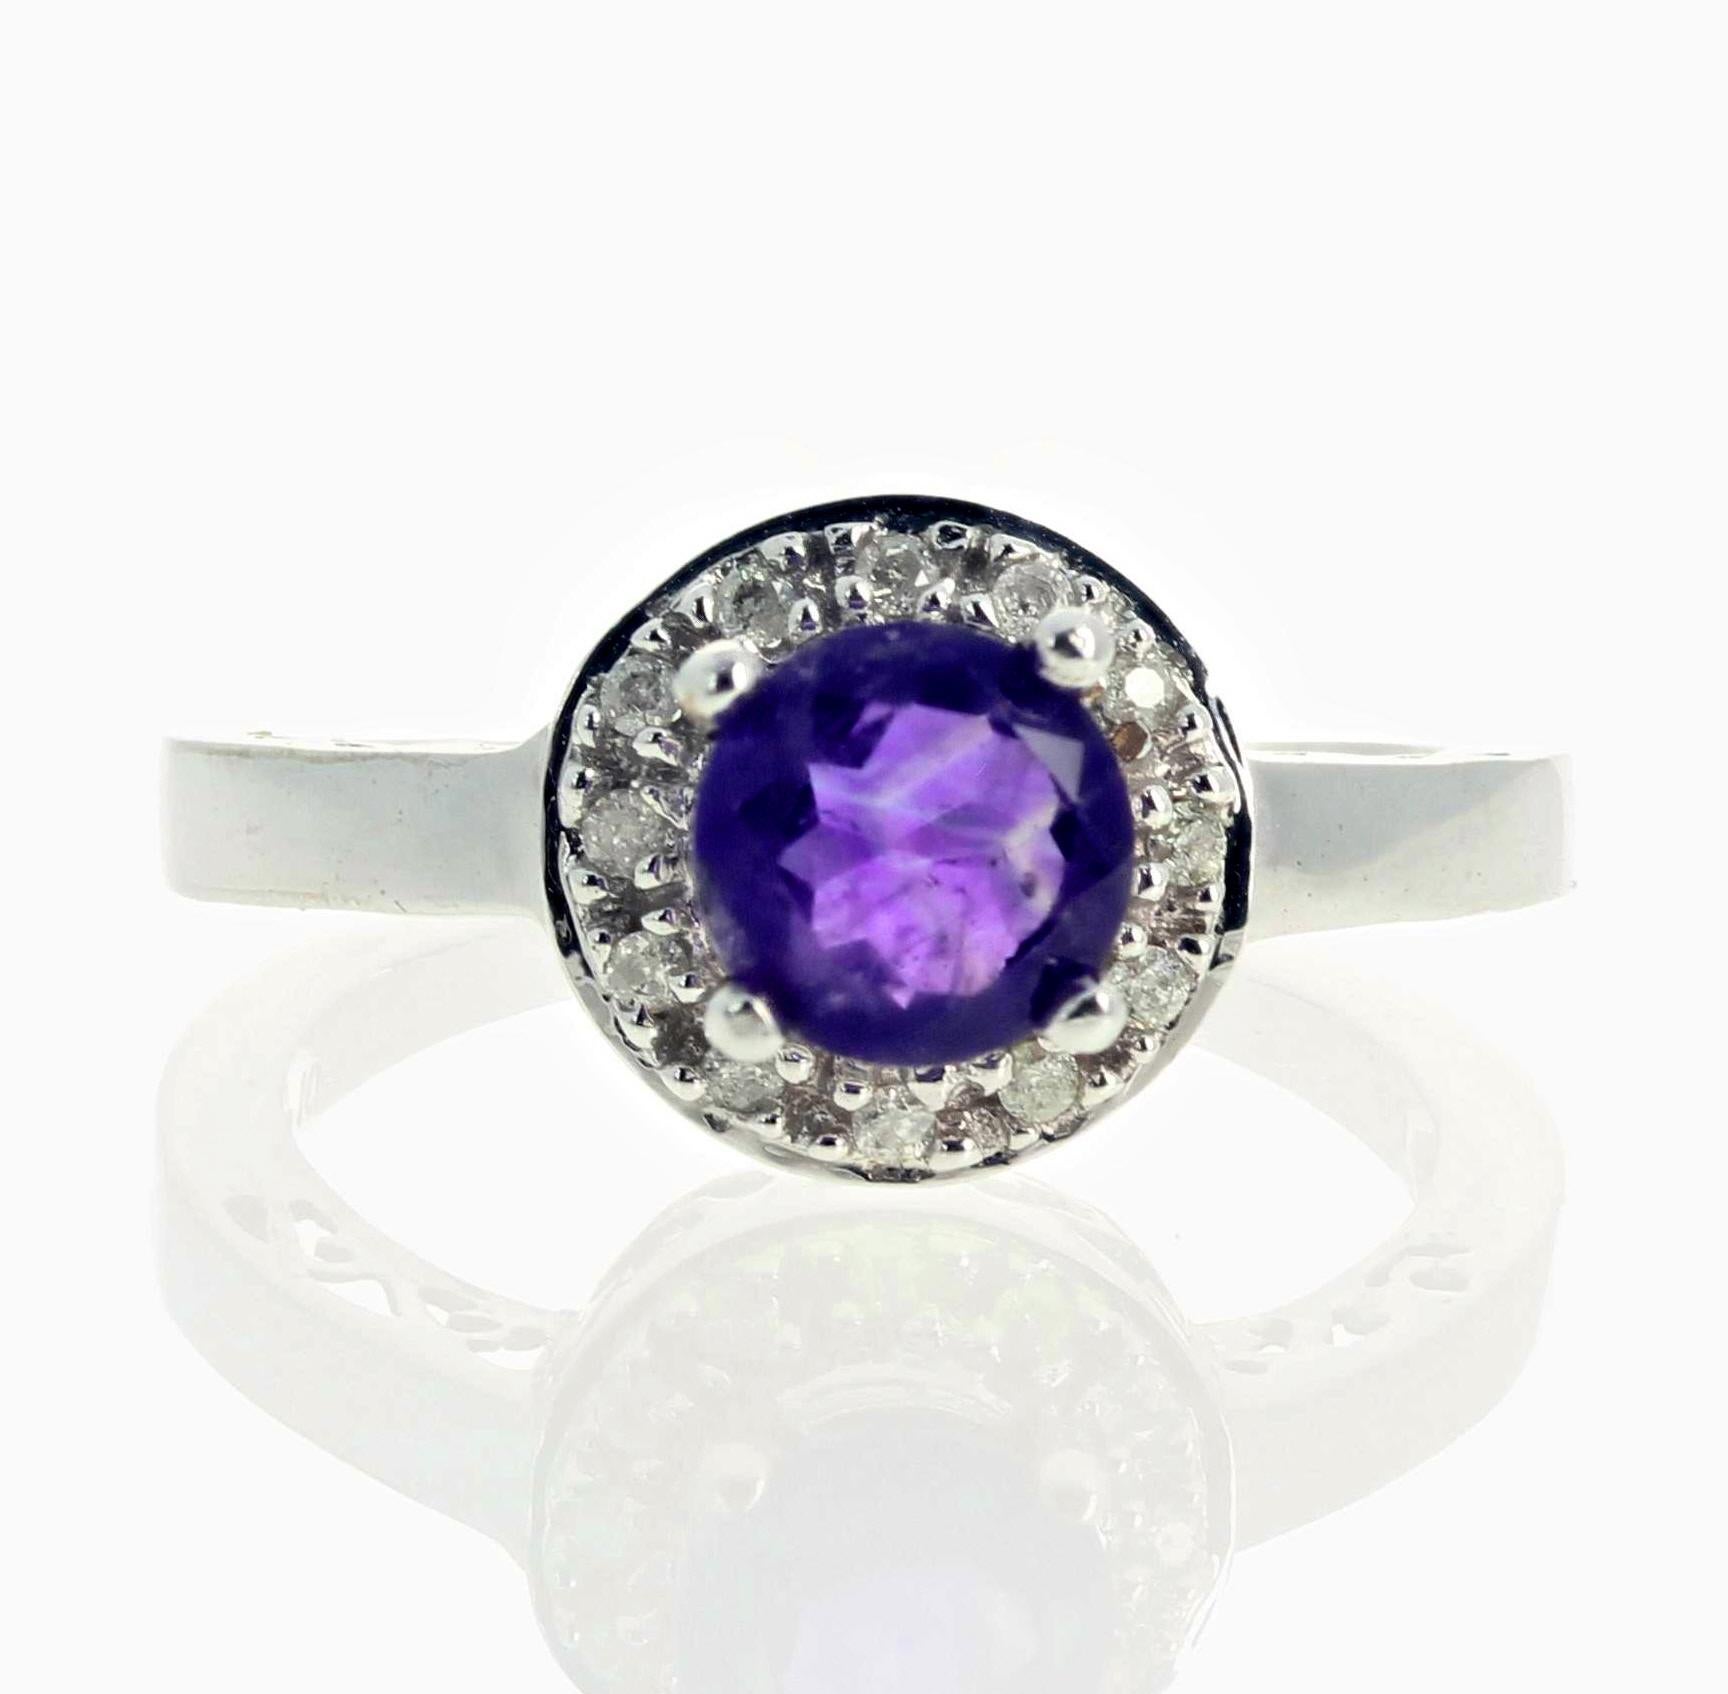 This beautiful petite dazzling Amethyst (6 mm - 0.6 carats) and 0.10 carats Diamond ring set in a classic 10K white gold ring size 7 (sizable).  This is a perfect gift for someone on their special day. 